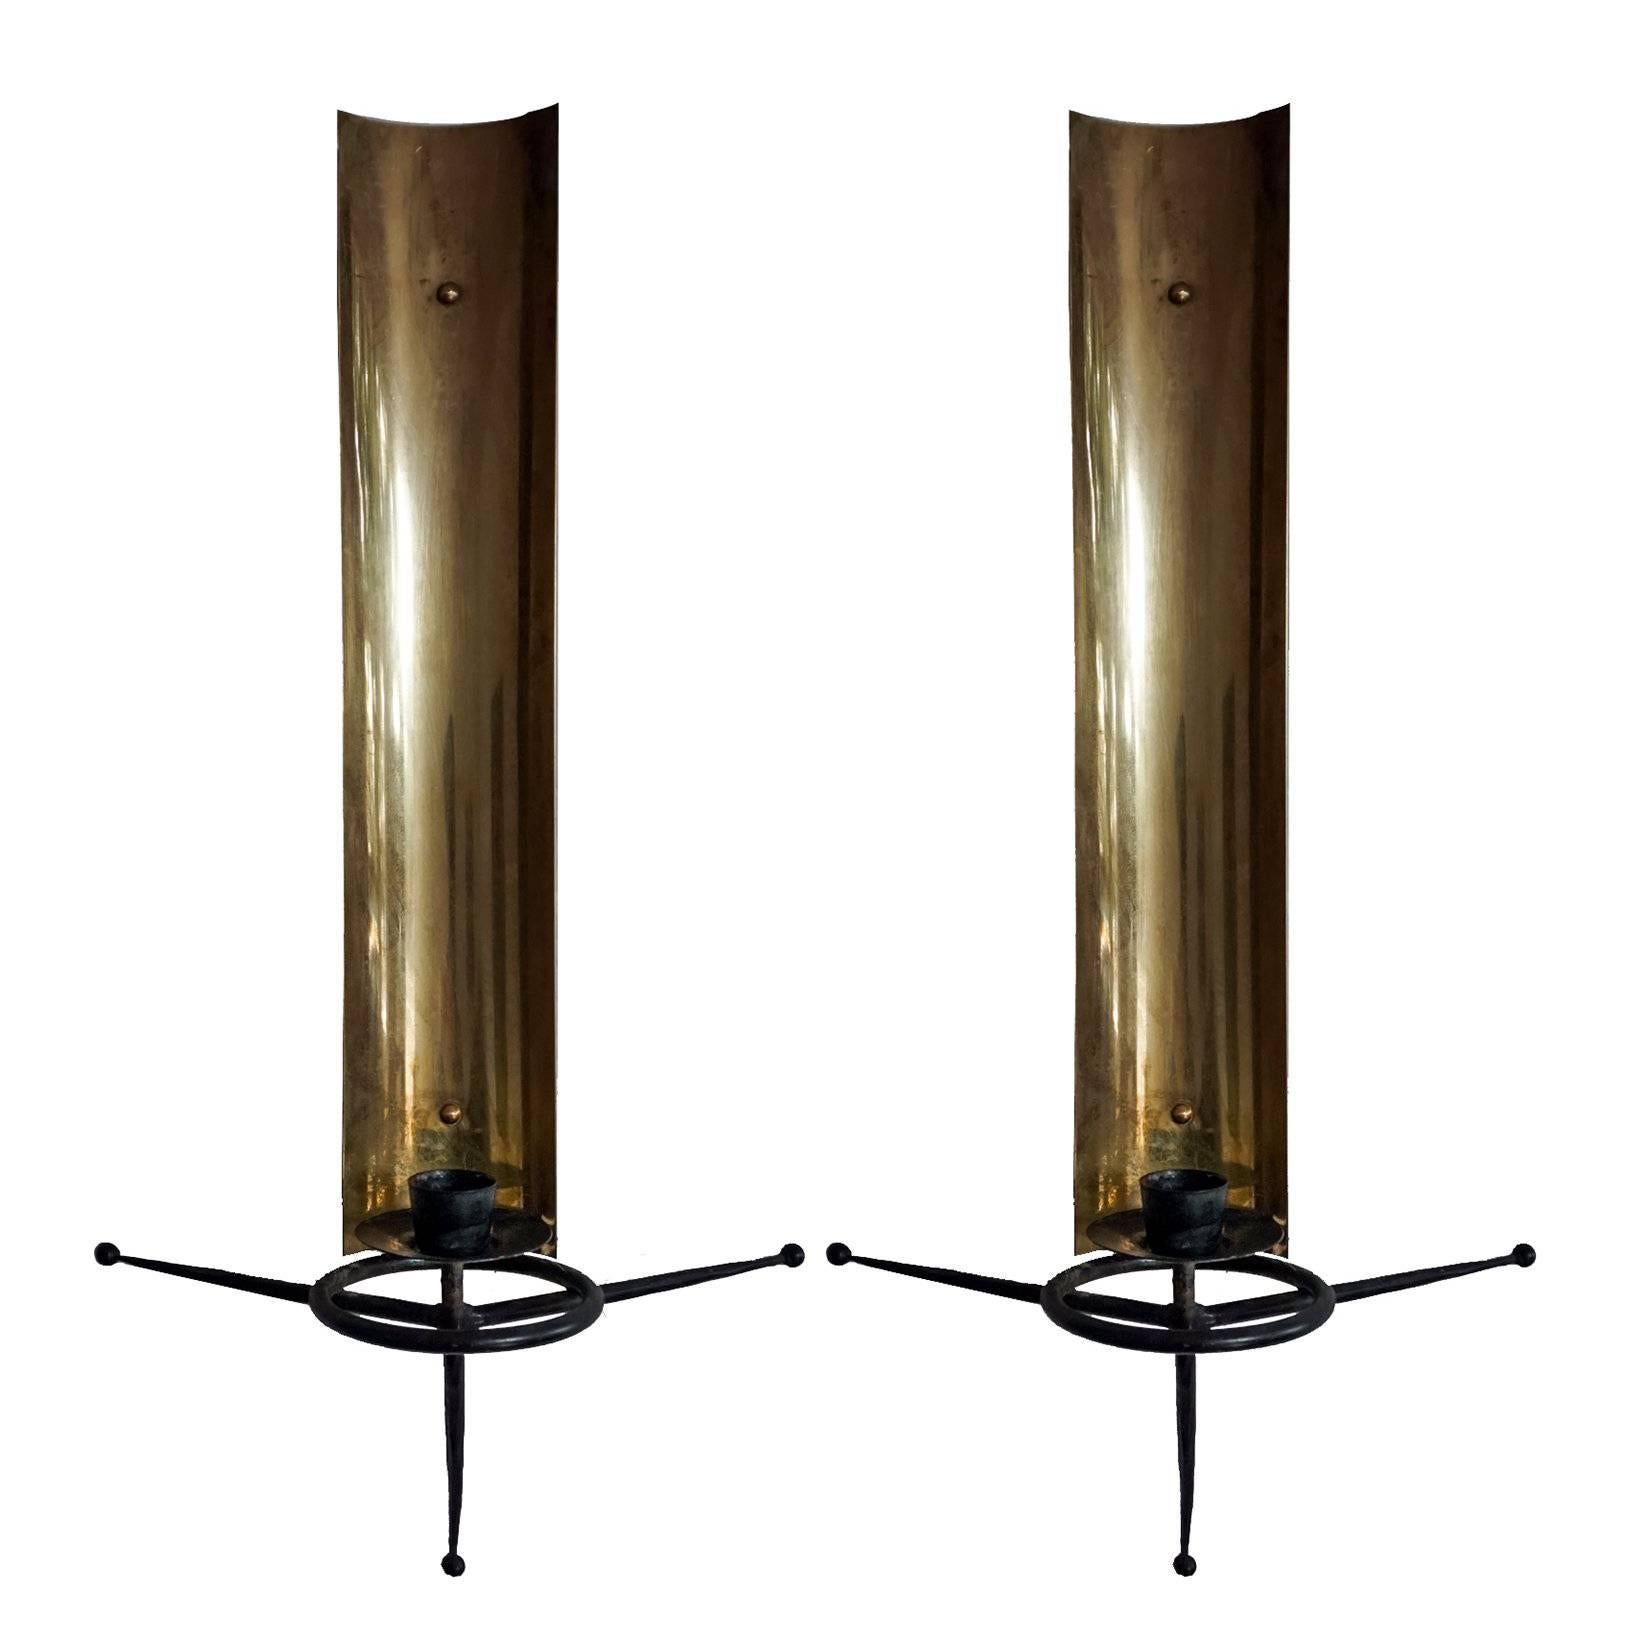 Tony Paul Wall Candle Sconce